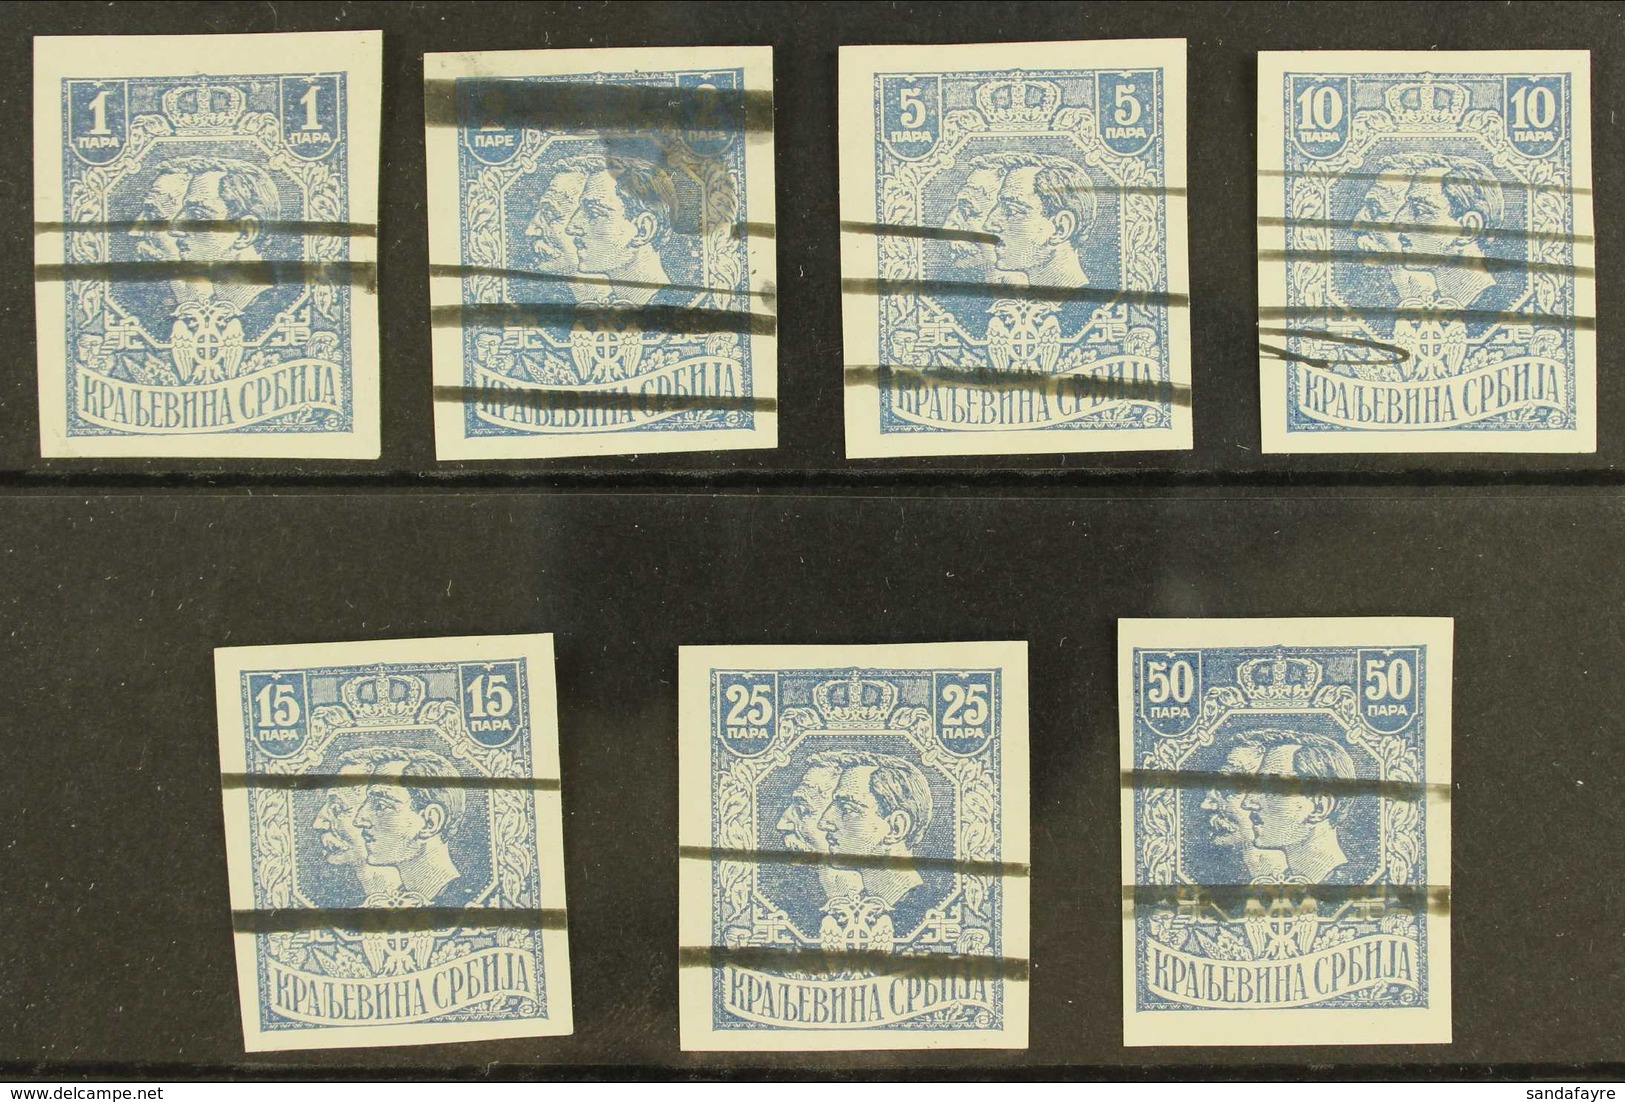 1918 IMPERF PROOFS For The 'King Petar & Prince Alexander' Due Design (as SG 194/226) - Seven Different Values Printed I - Serbia